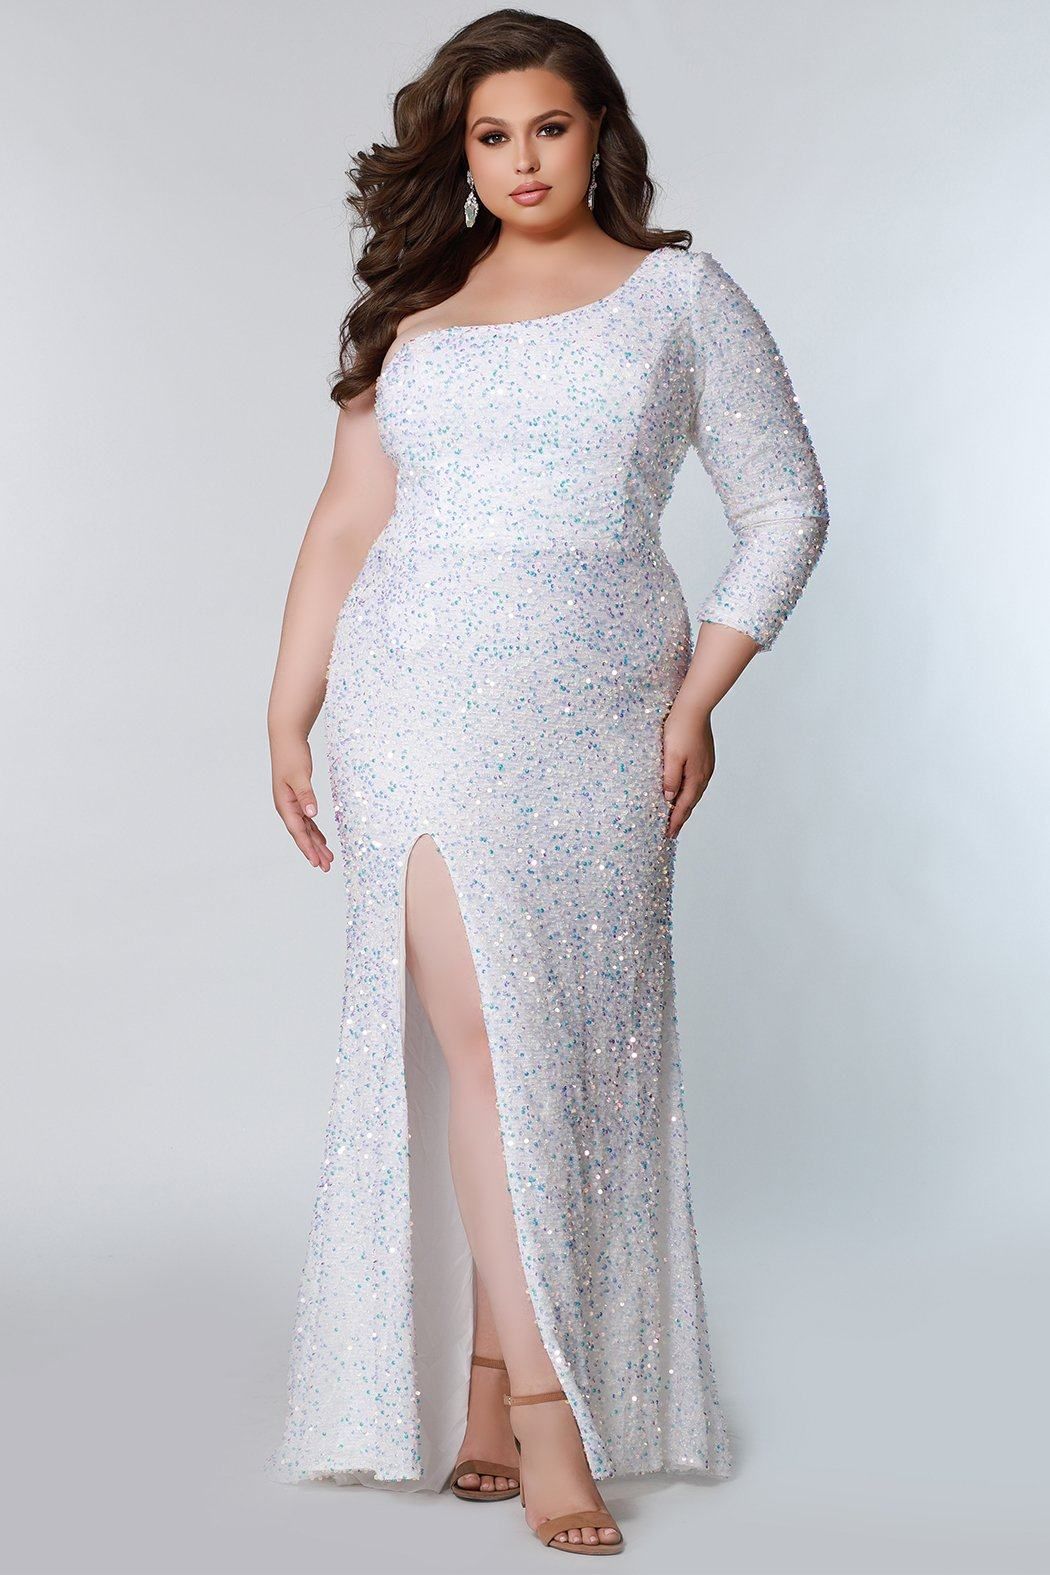 Style SC7319 Sydney's Closet Size 14 Prom White Side Slit Dress on Queenly